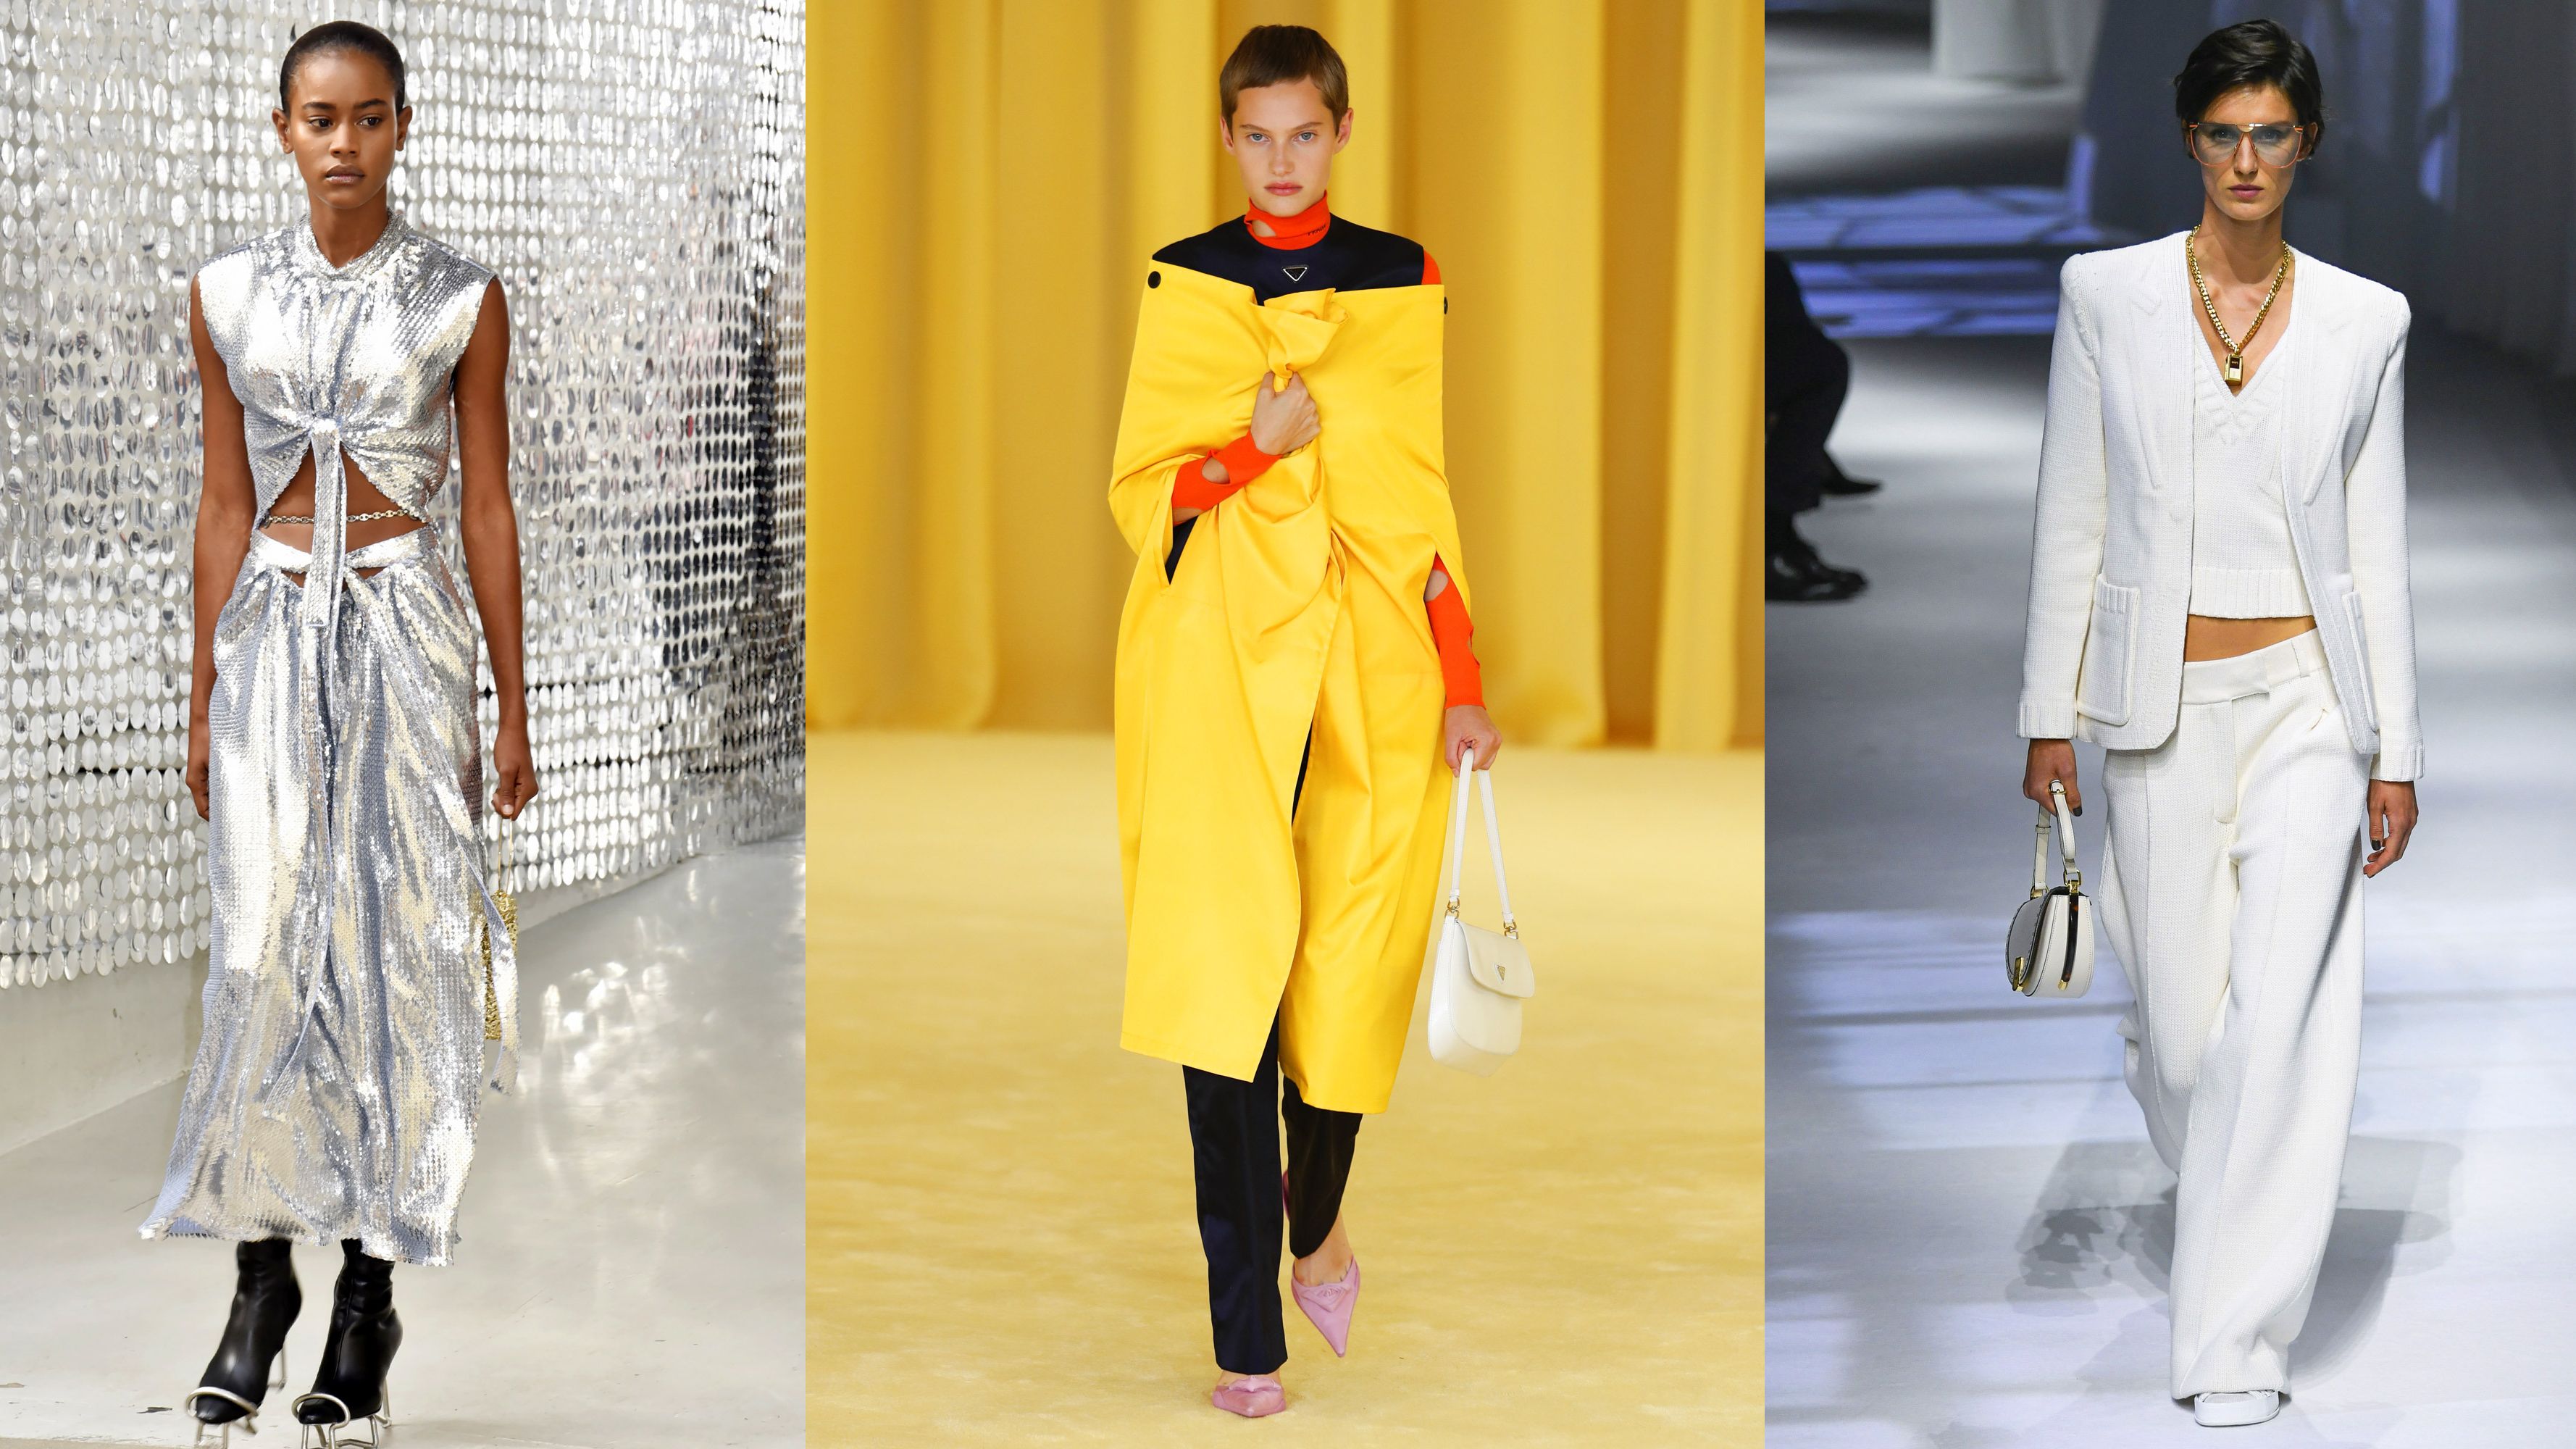 2021 Fashion Trends: What's New For Spring & Summer